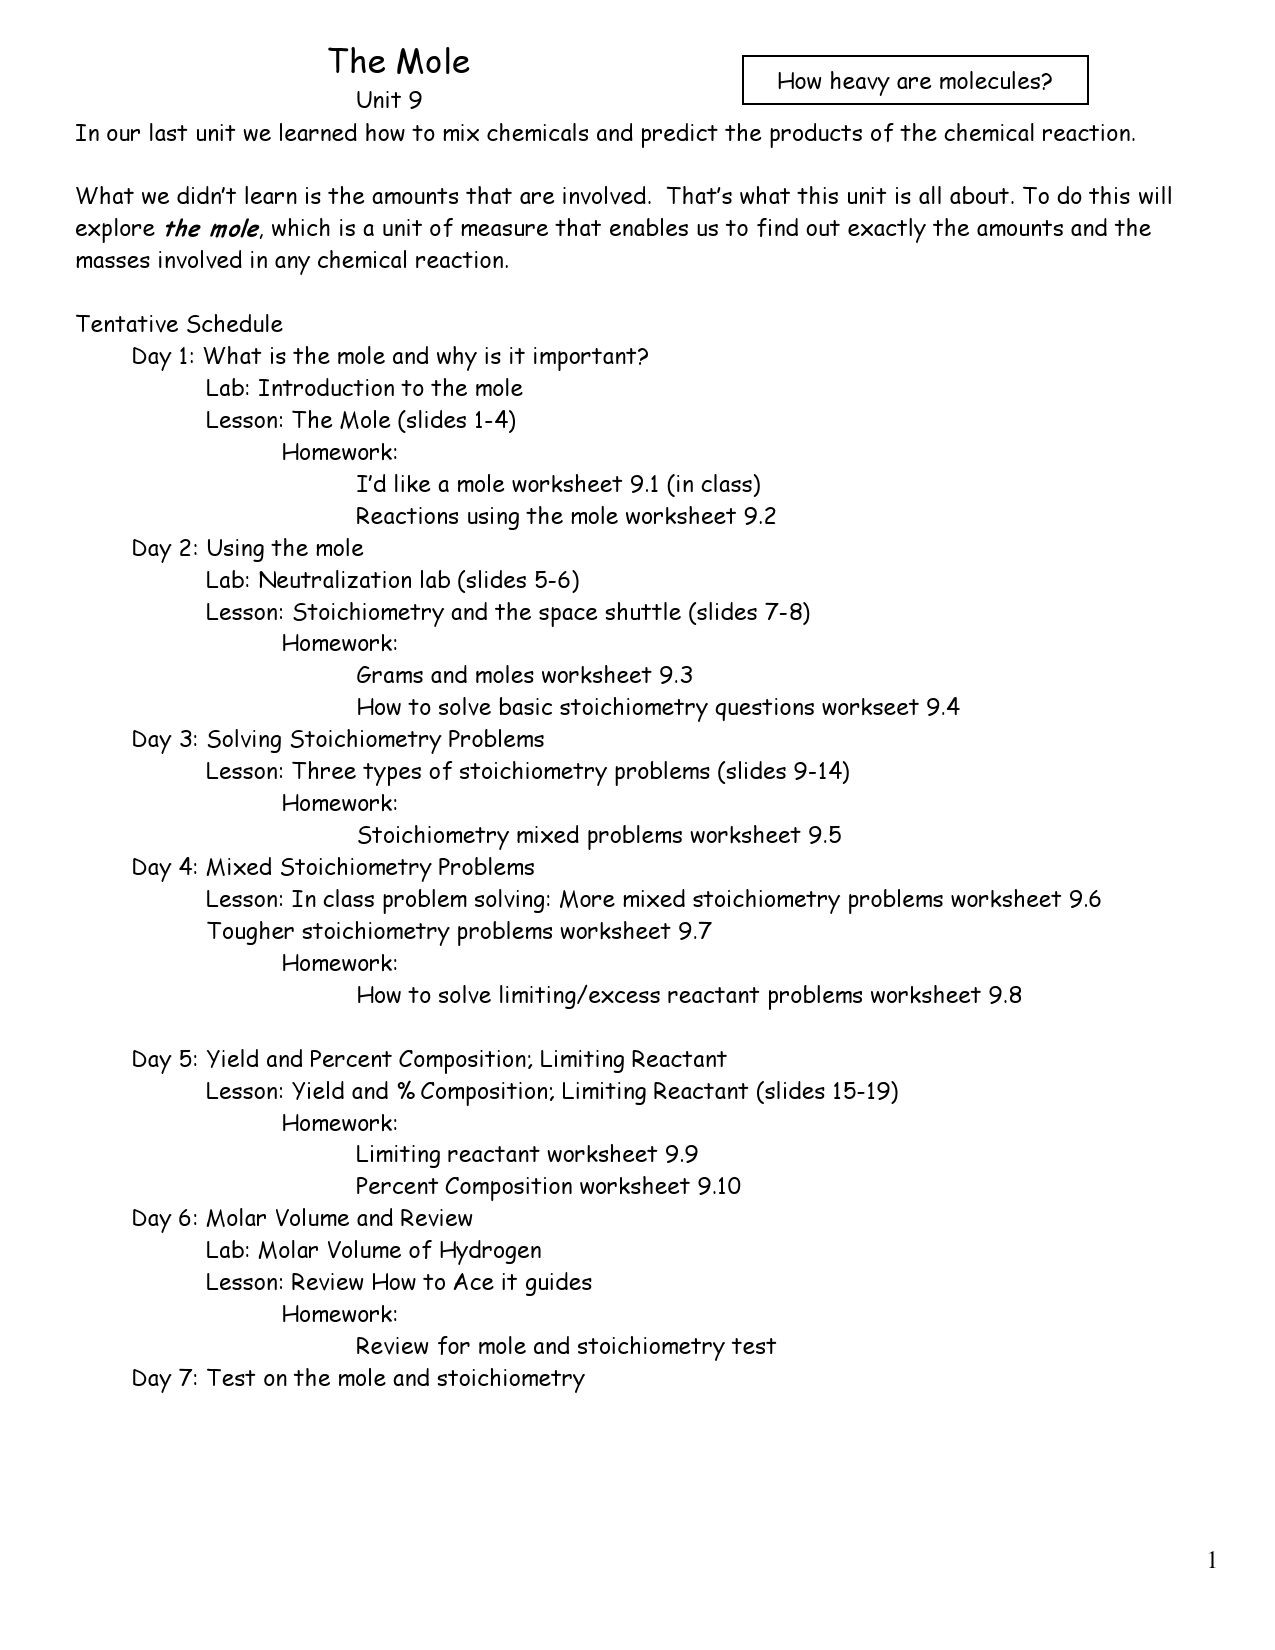 Mole Worksheet 1 I Chapter 9 the Mole and Stoich Packet by